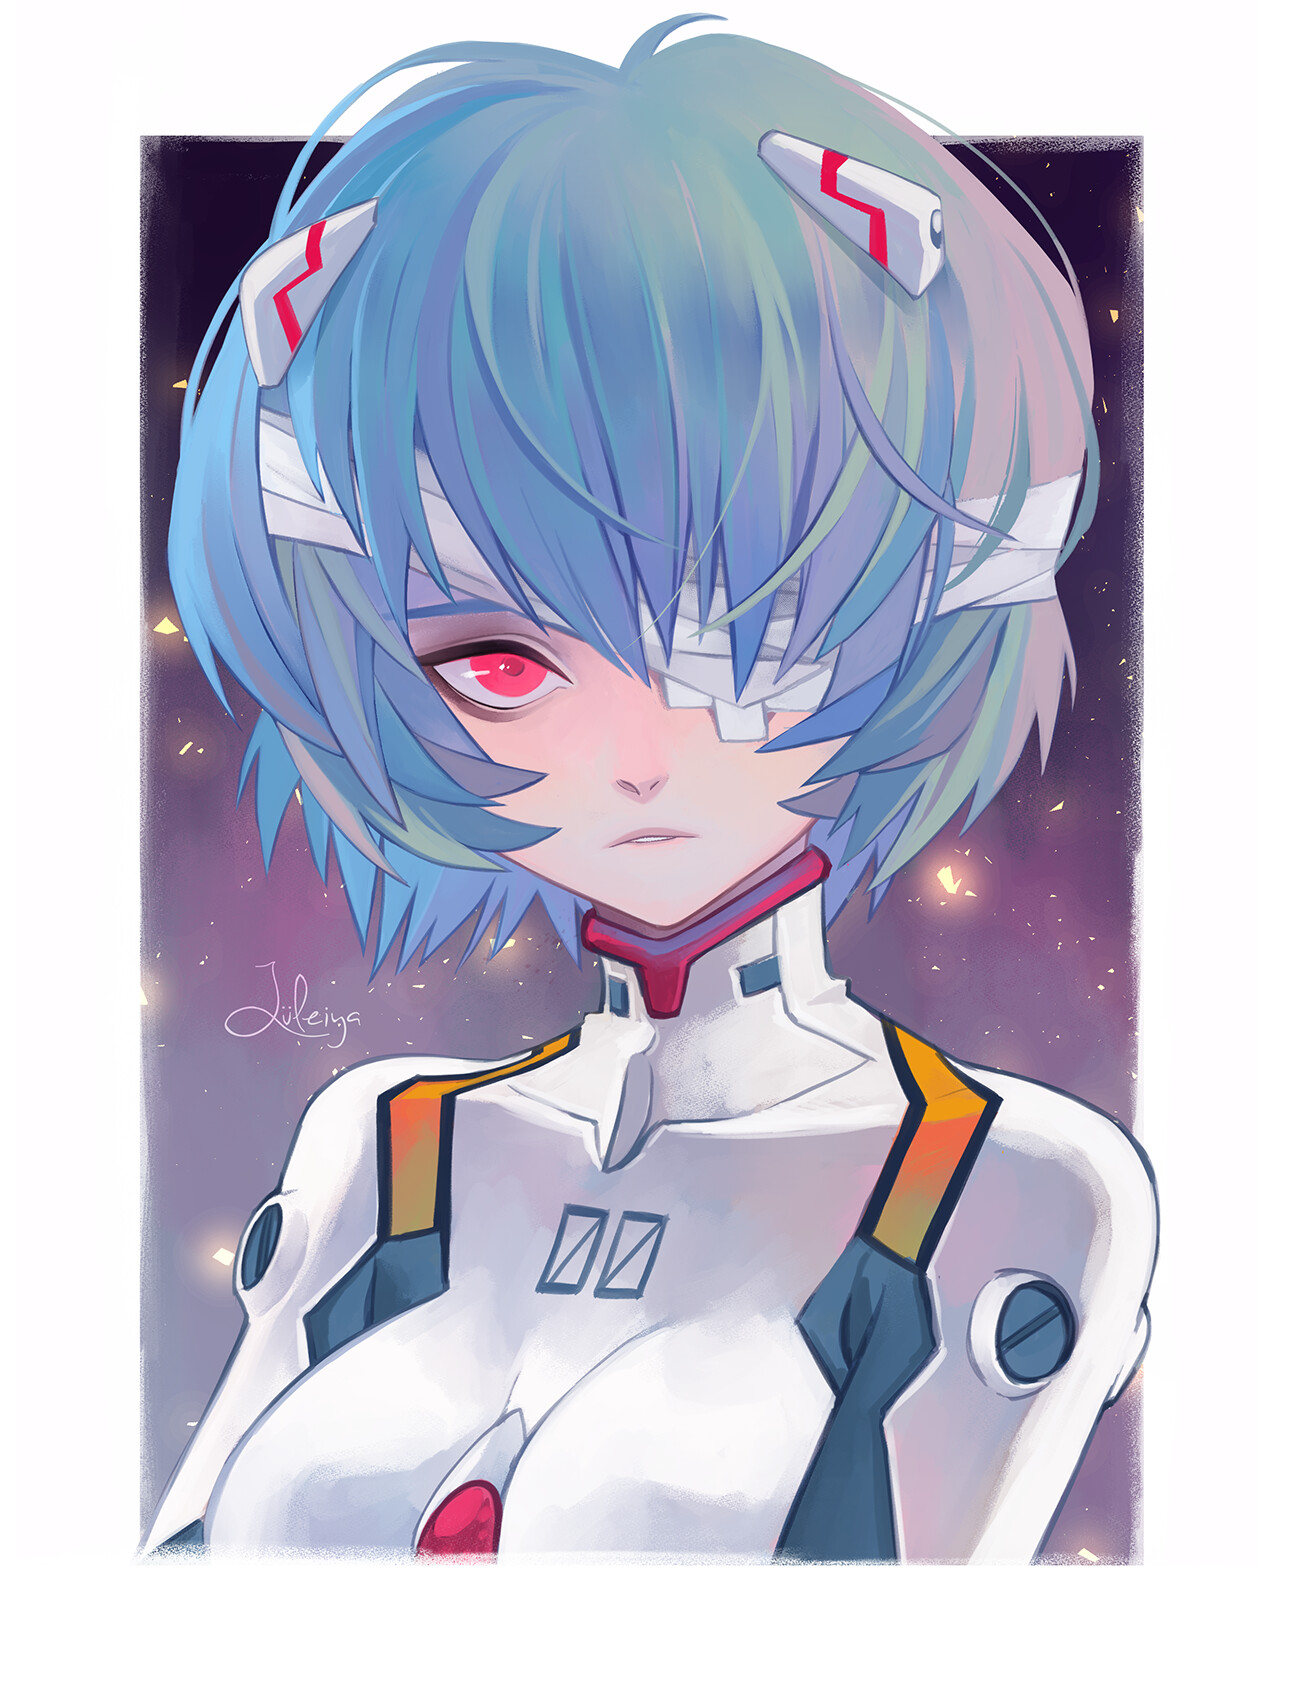 Ayanami Rei from Evangelion anime profile picture by